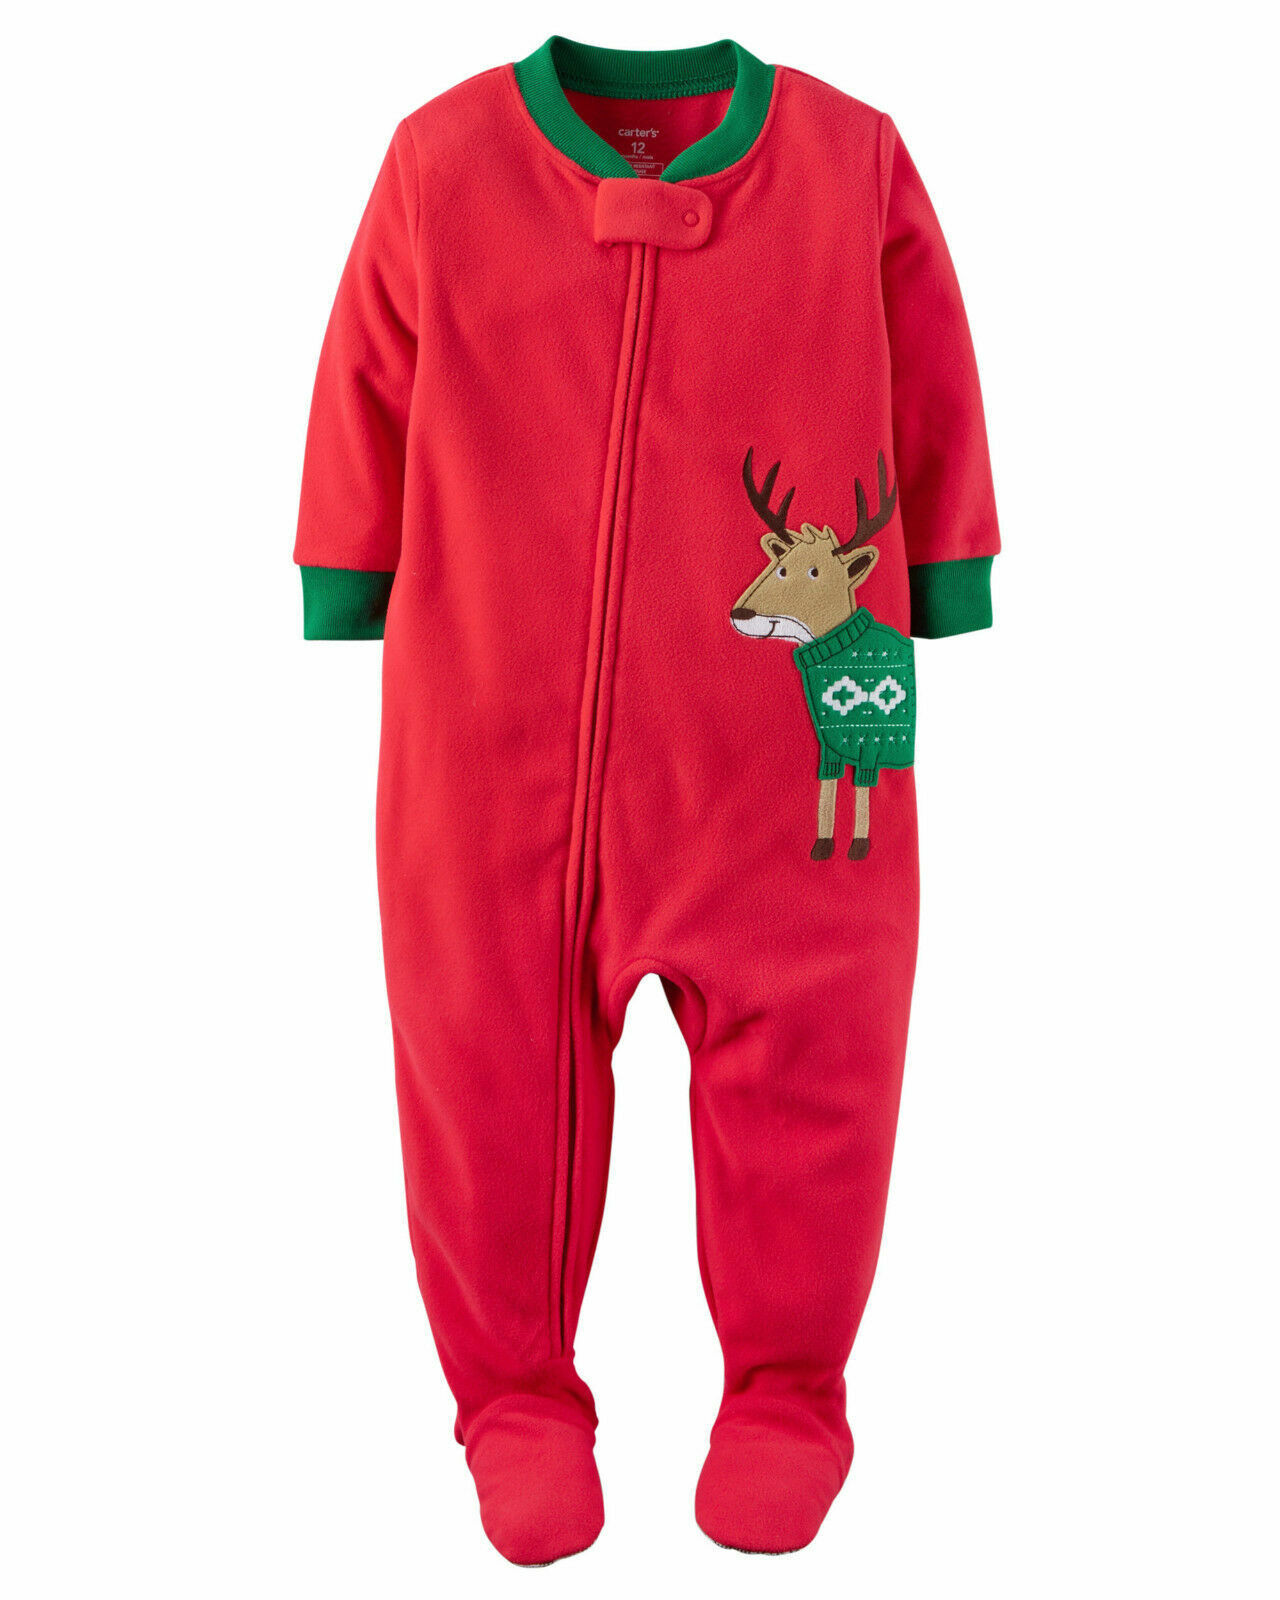 NWT ☀FOOTED FLEECE☀ Colorado Springs Mall CARTER'S Boys CHRISTMAS New sold out REINDEER Pajama